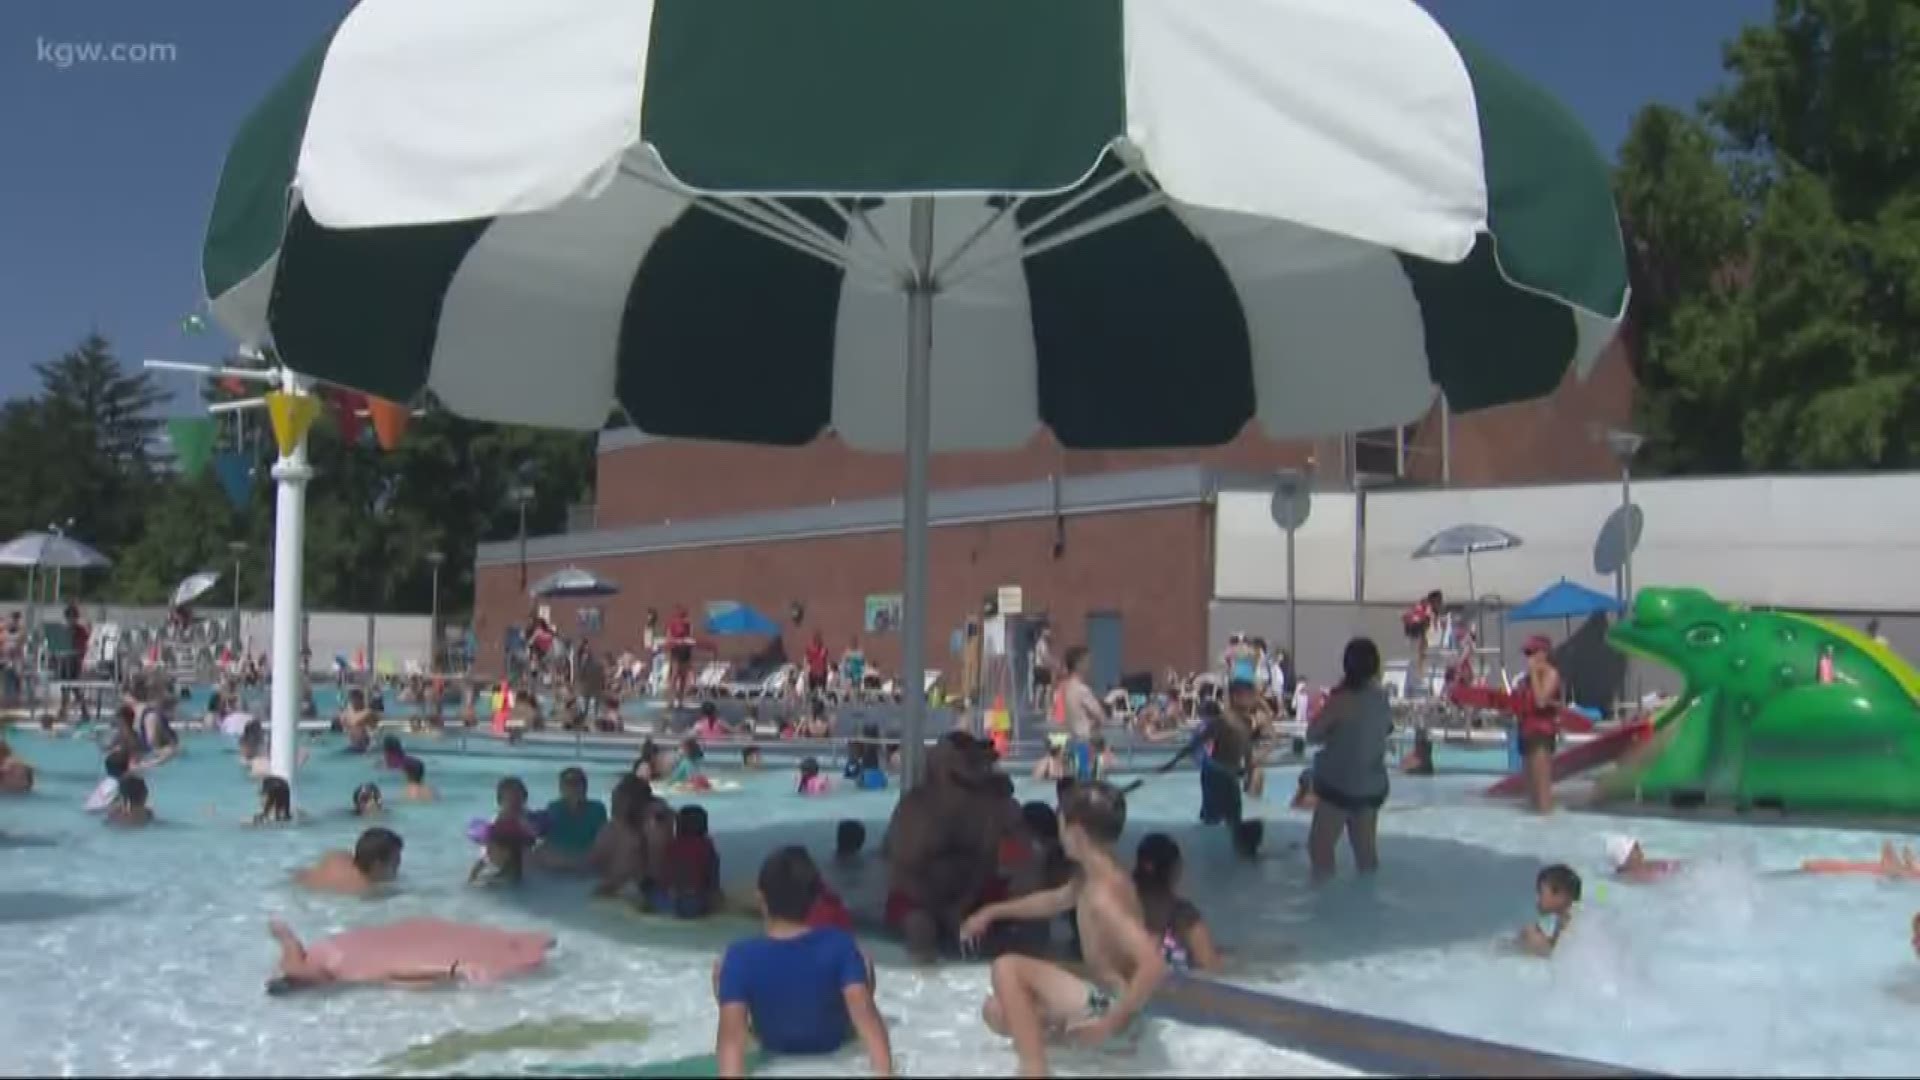 Portland was into its 15th July day over 90 degrees, which breaks a record from 2009. Here's how people beat the heat.